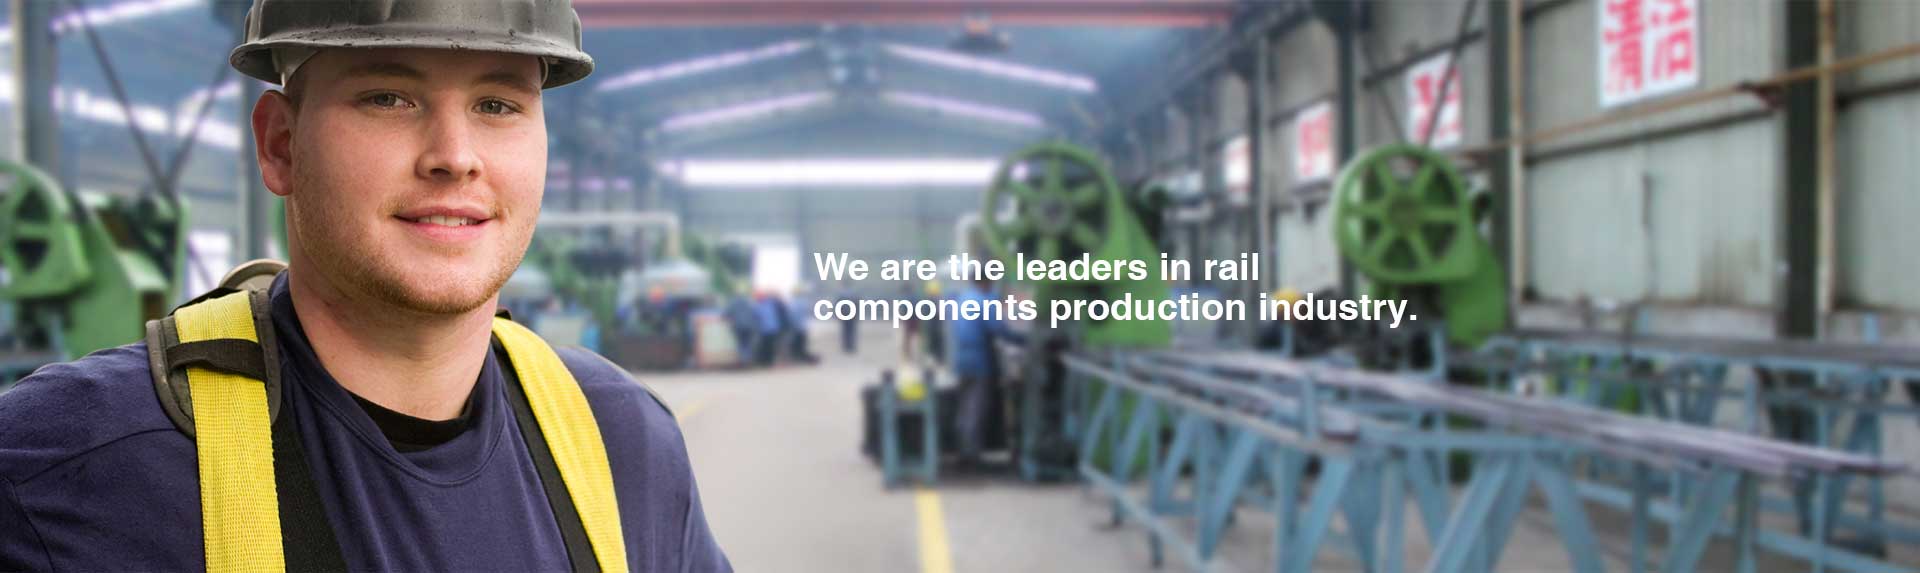 leading manufacturer of rail components